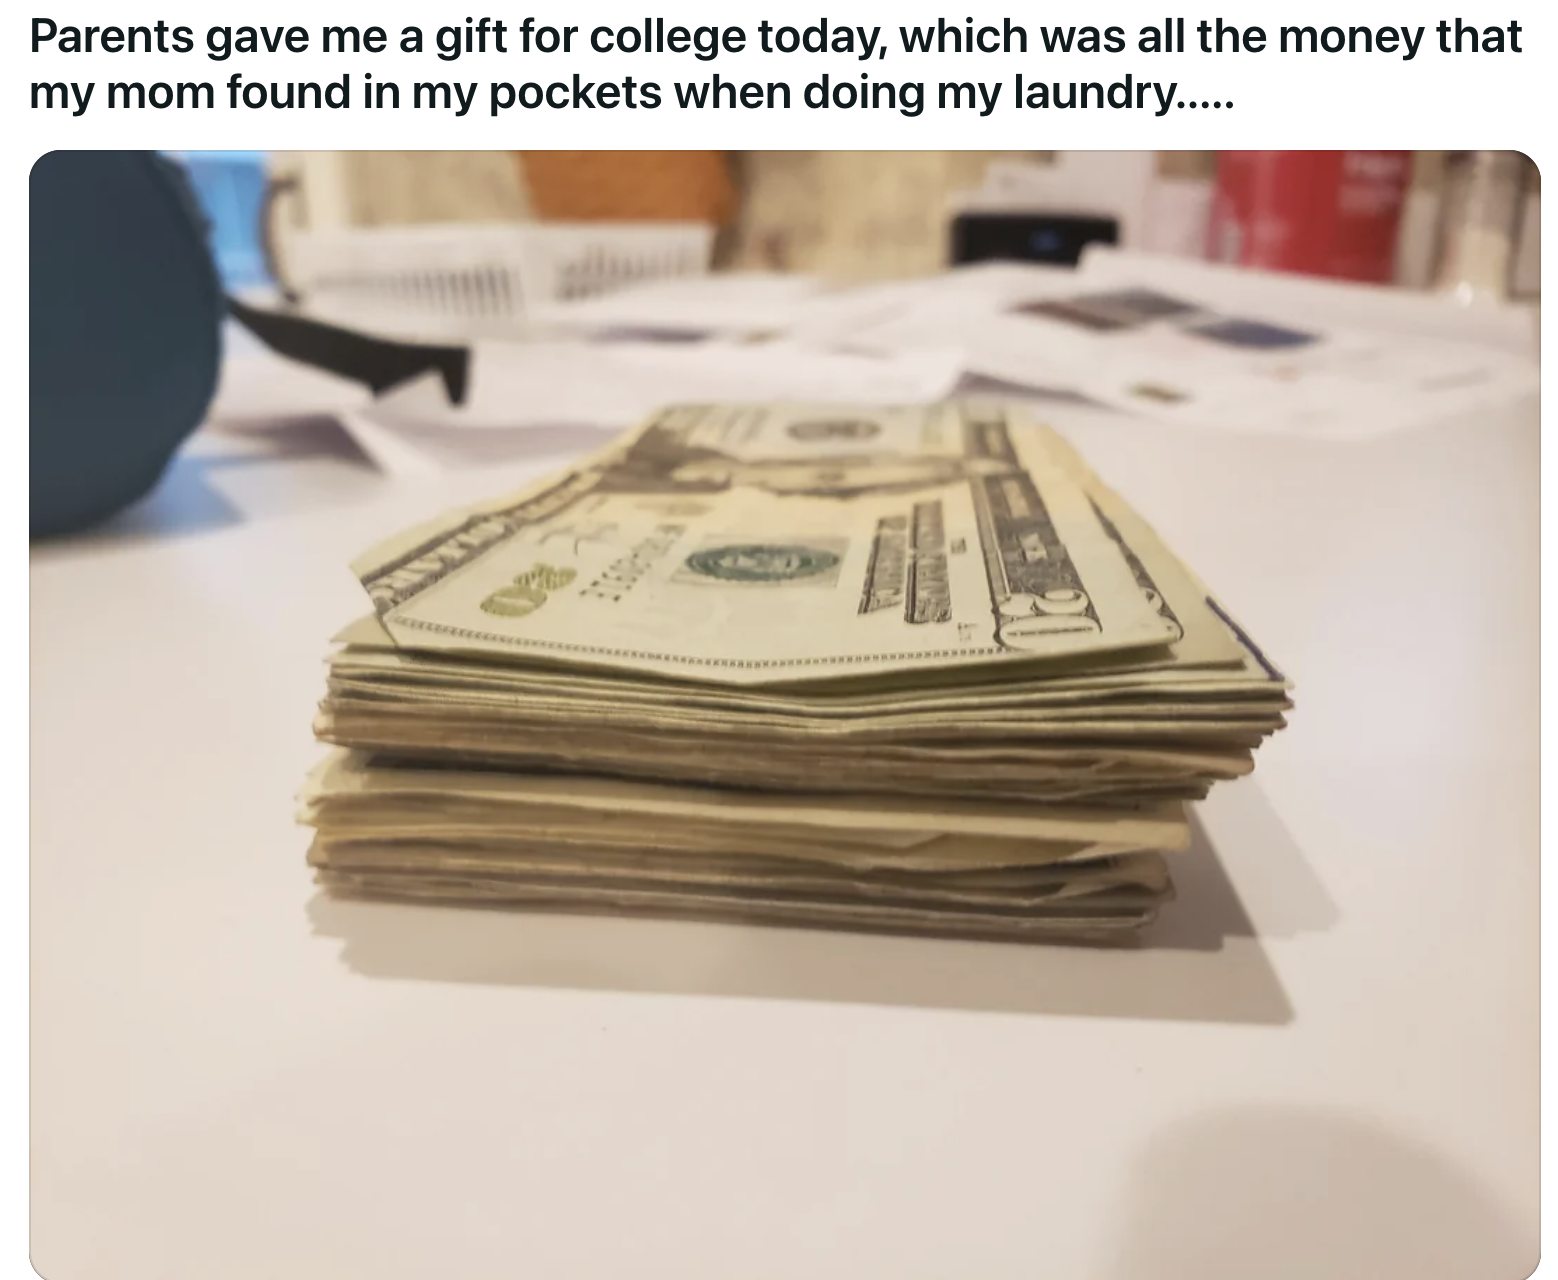 Stack of various bills on a table, presented as a gift from parents for college funds